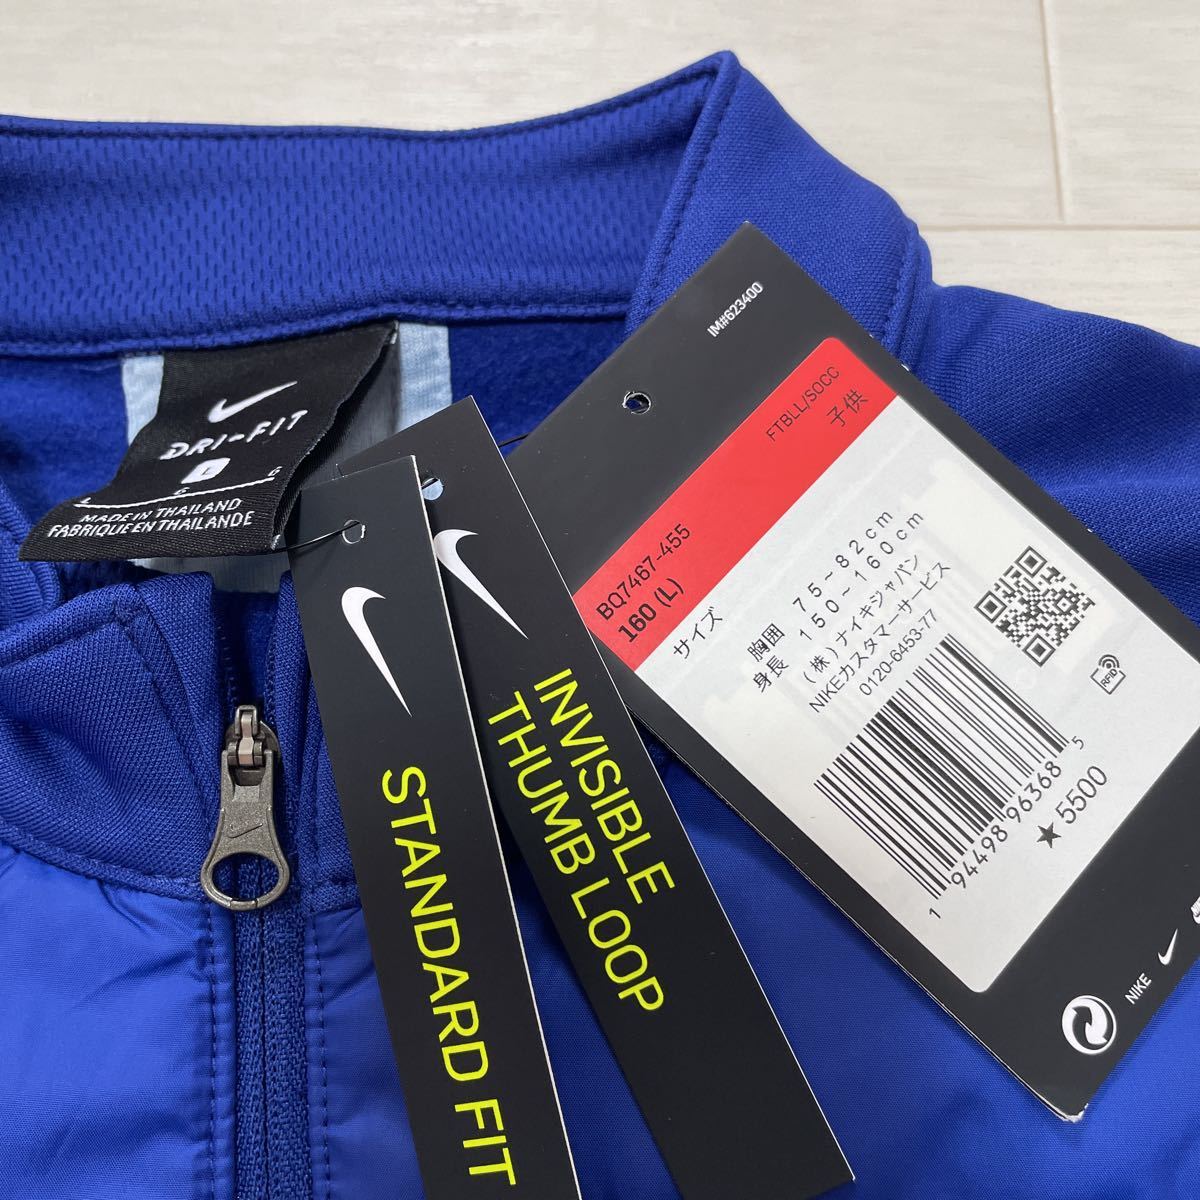  new goods NIKE Nike ACADEMY WW drill top Junior ( royal blue ) cotton inside jacket pull oversize L 160 unused tag attaching 